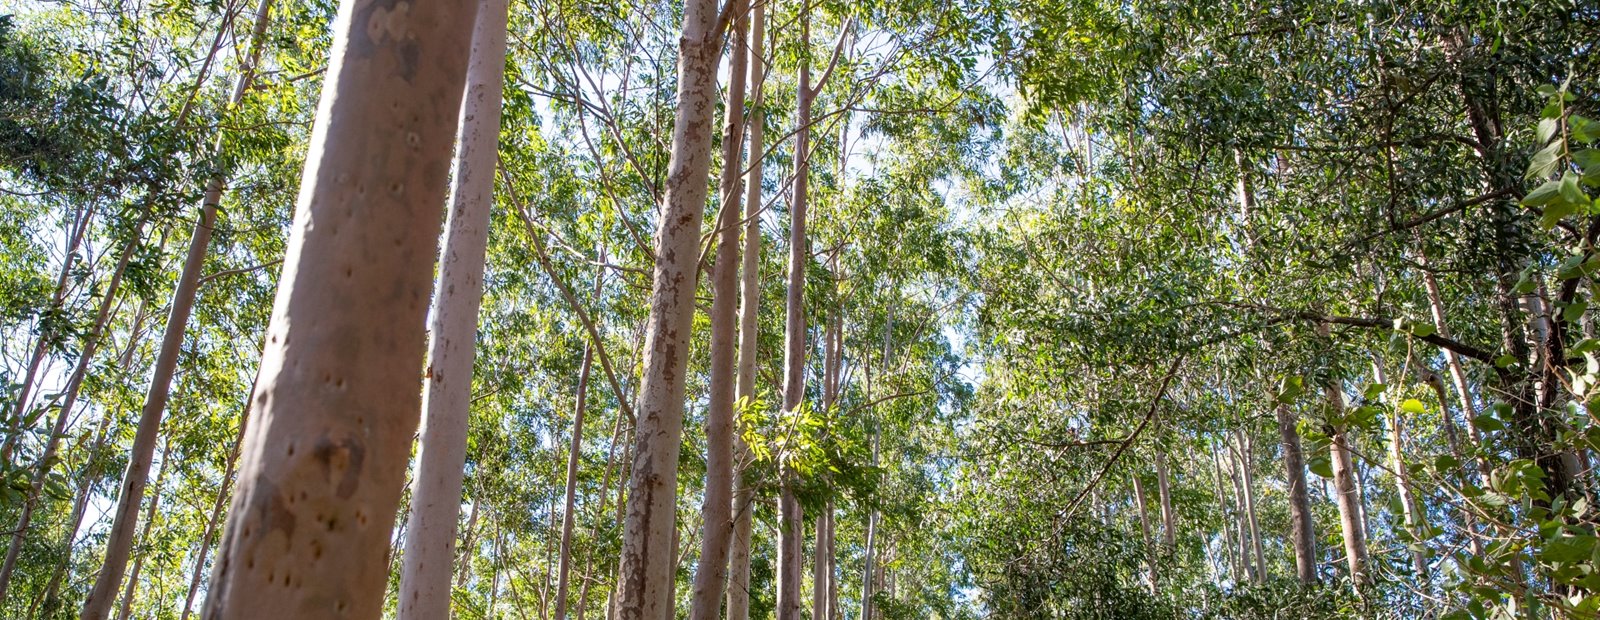 Realising the Carbon Sequestration Benefits of Planted Forests